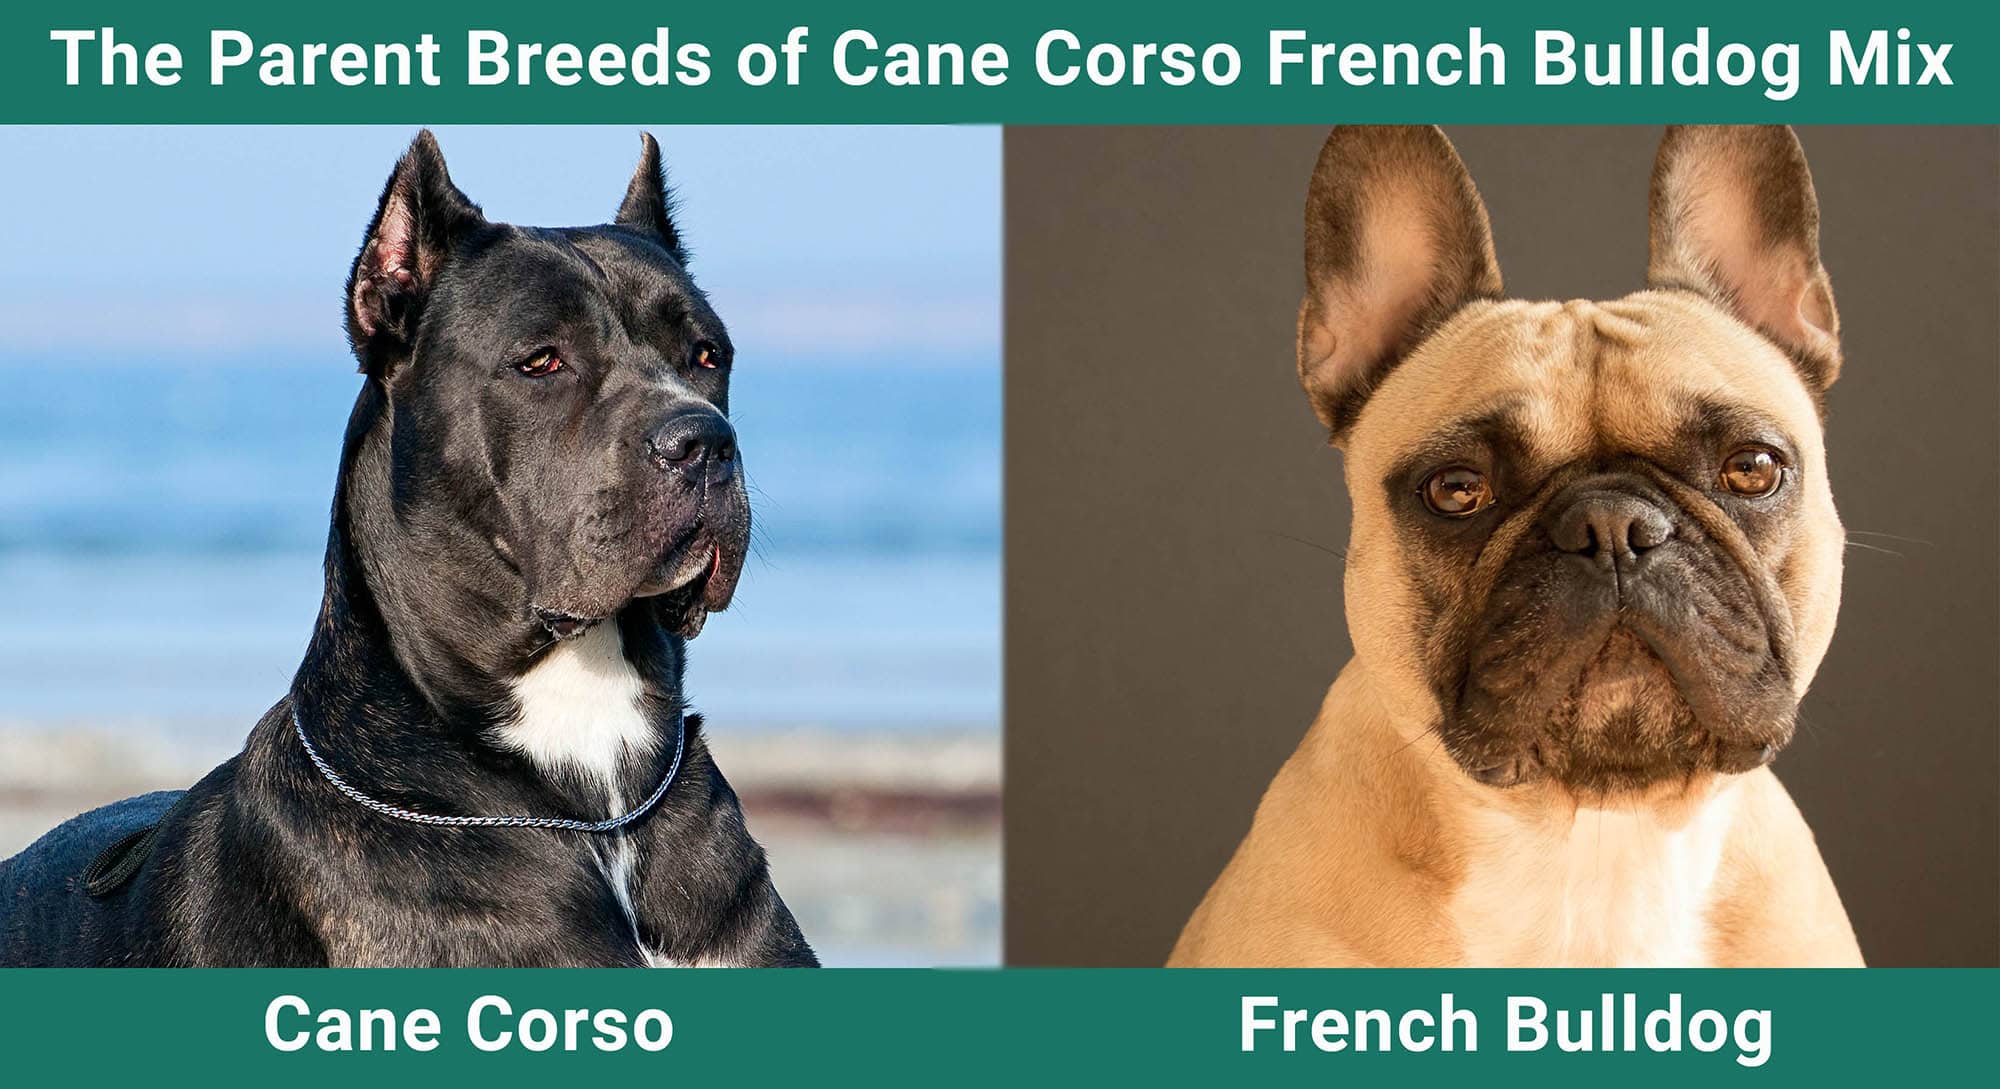 The Parent Breeds of the Cane Corso French Bulldog Mix